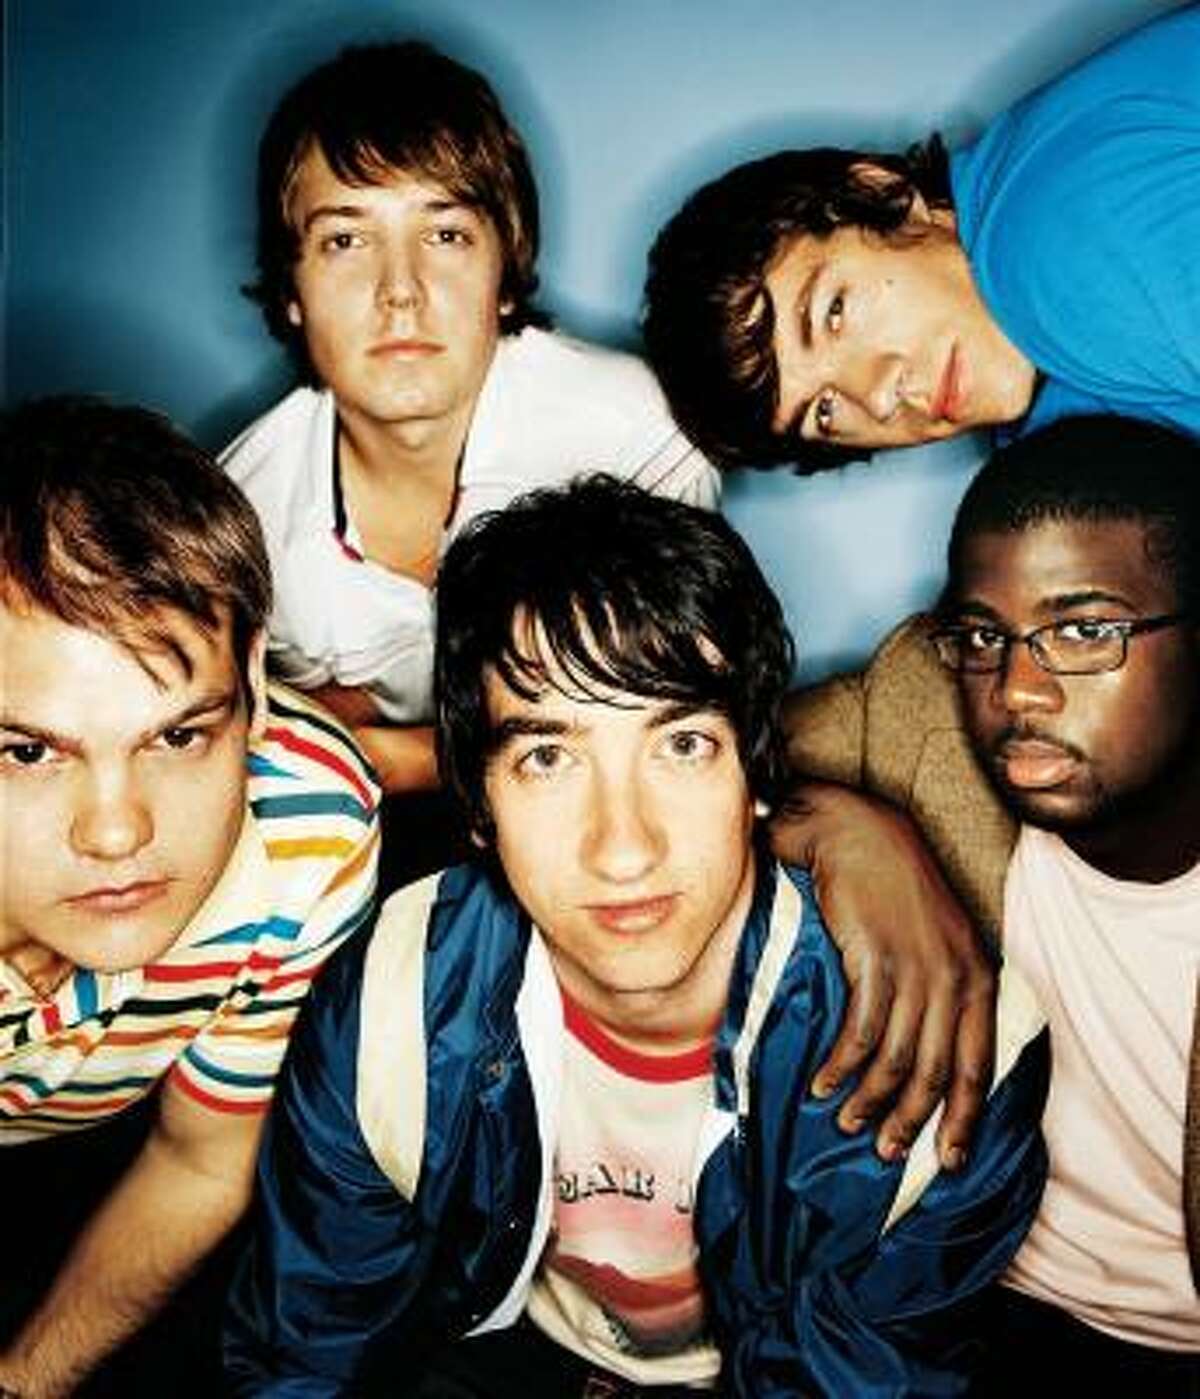 The Plain White T's scored big with their Hey There Delilah, the last song on their 2005 record All That We Needed.